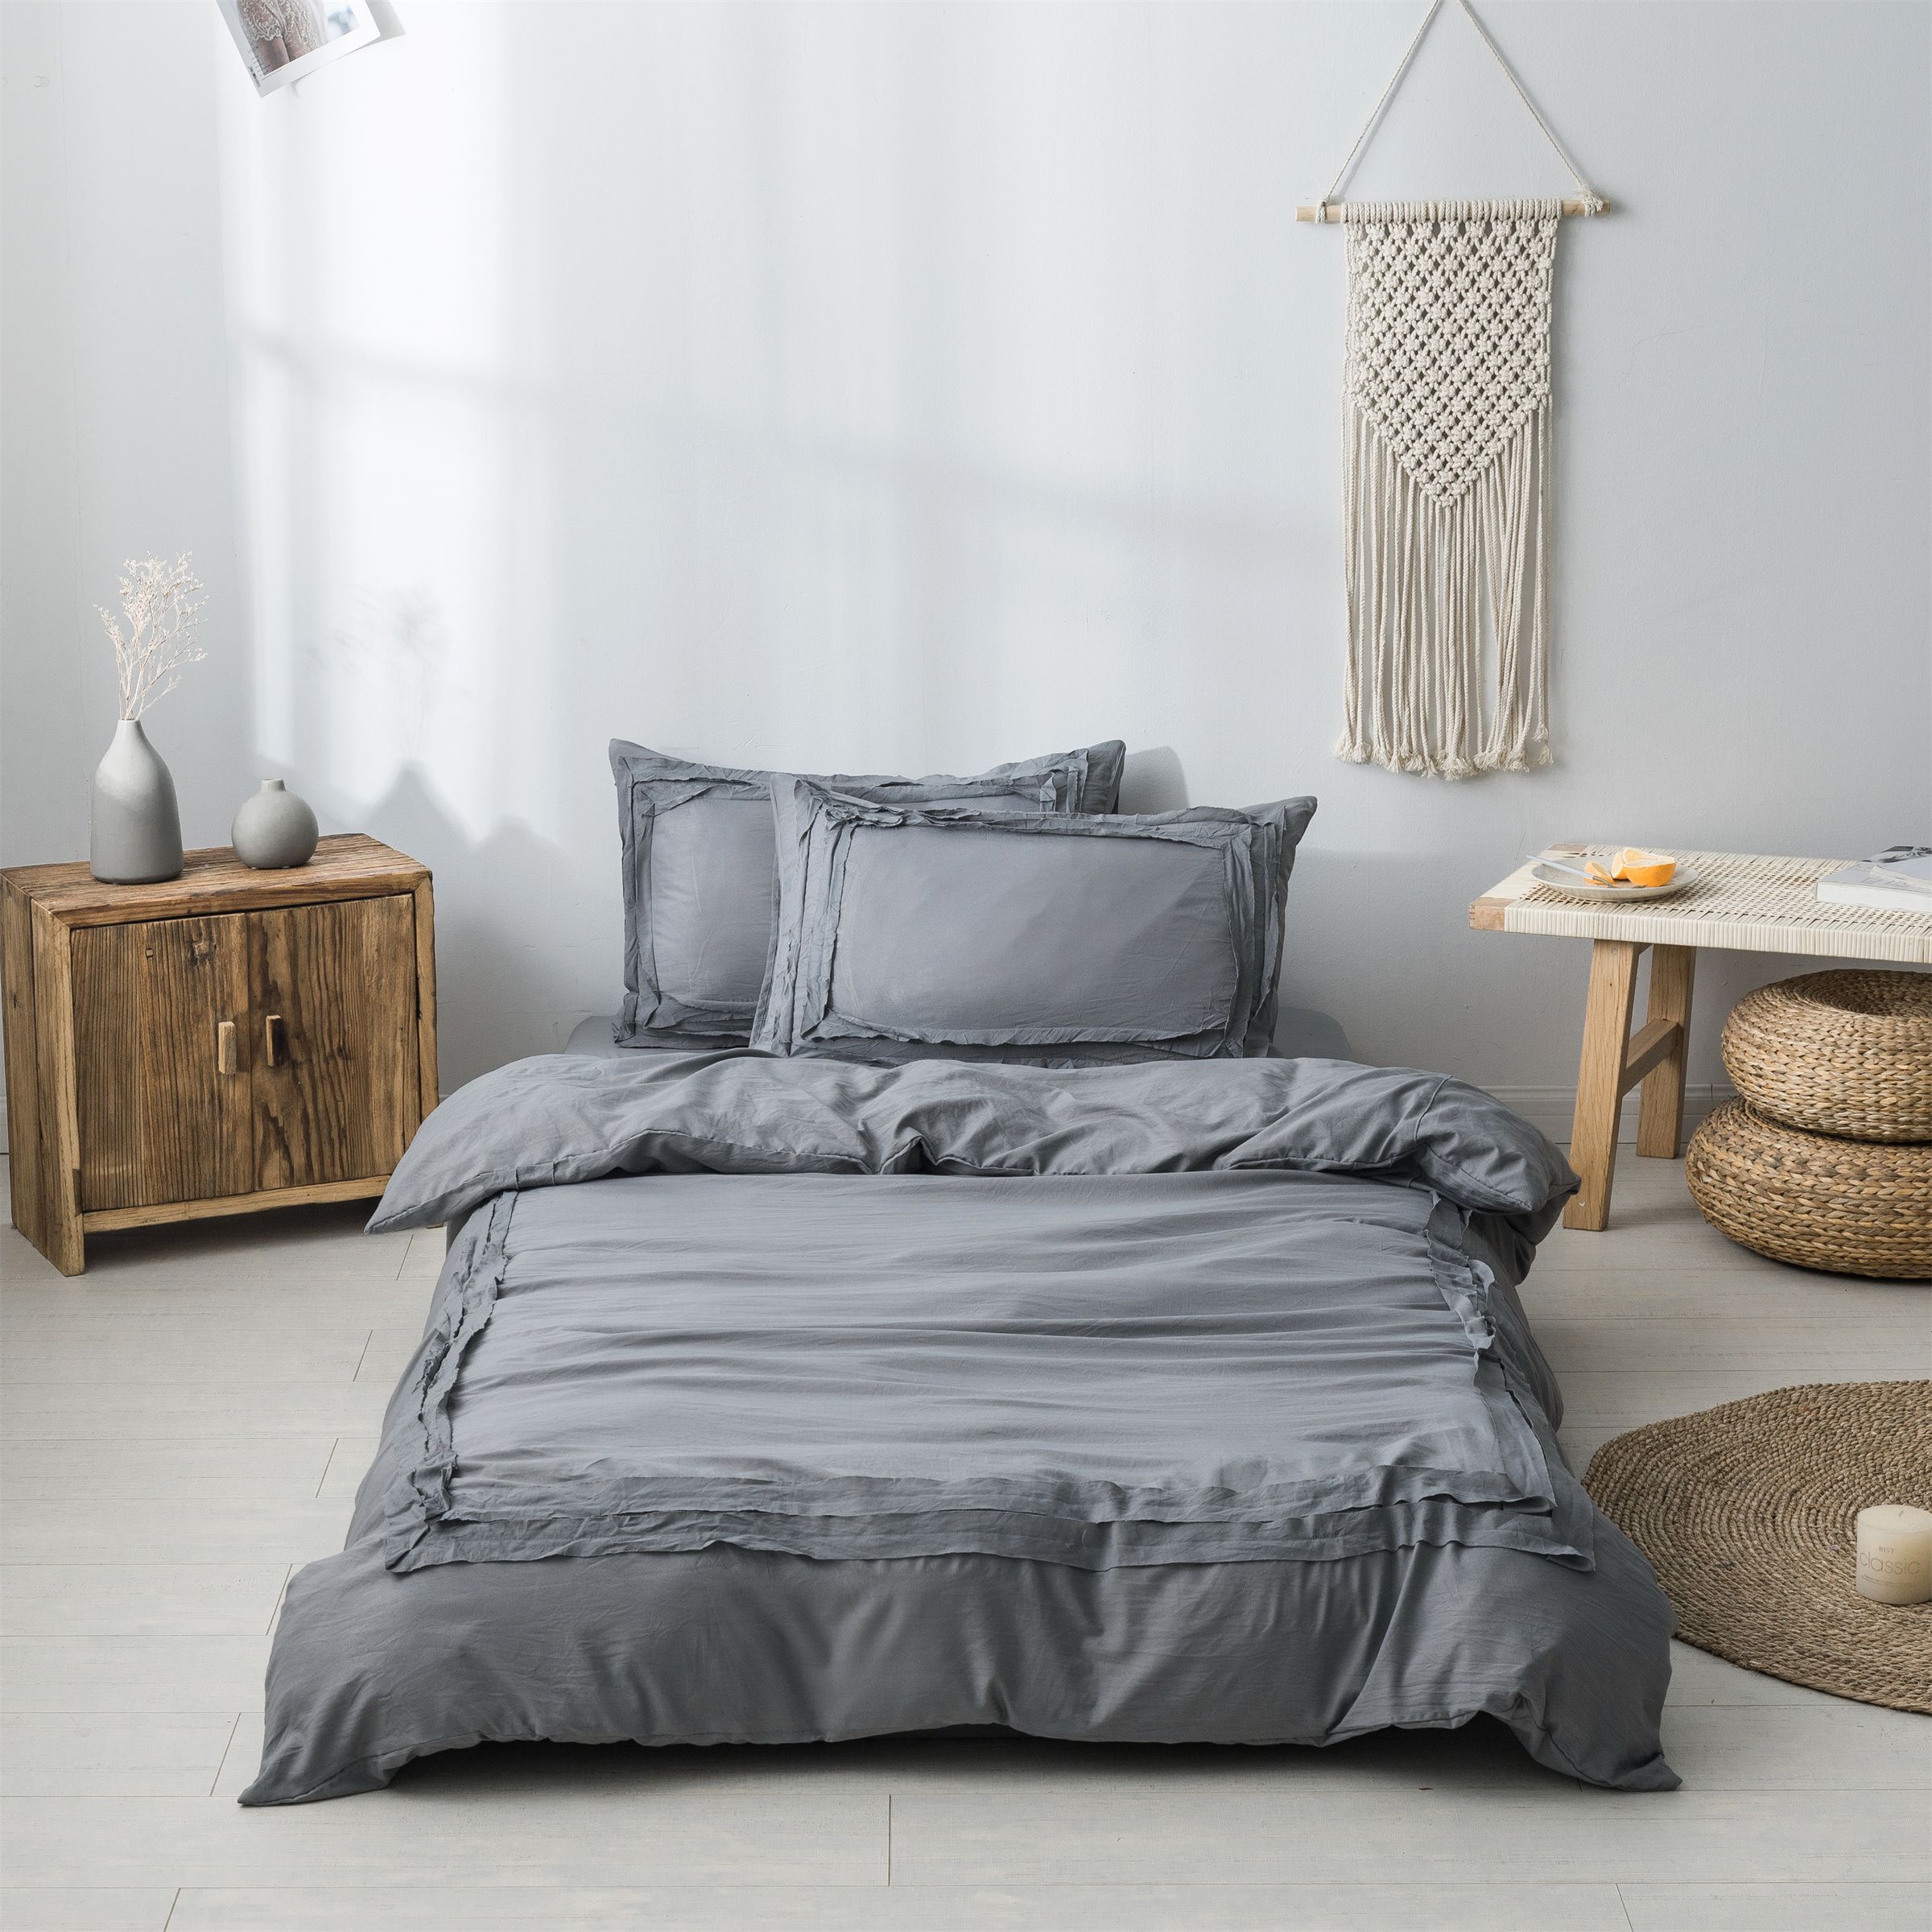 

2/3pcs Simple and Minimalist Style Bedding Set, including Pillowcases and Duvet Cover